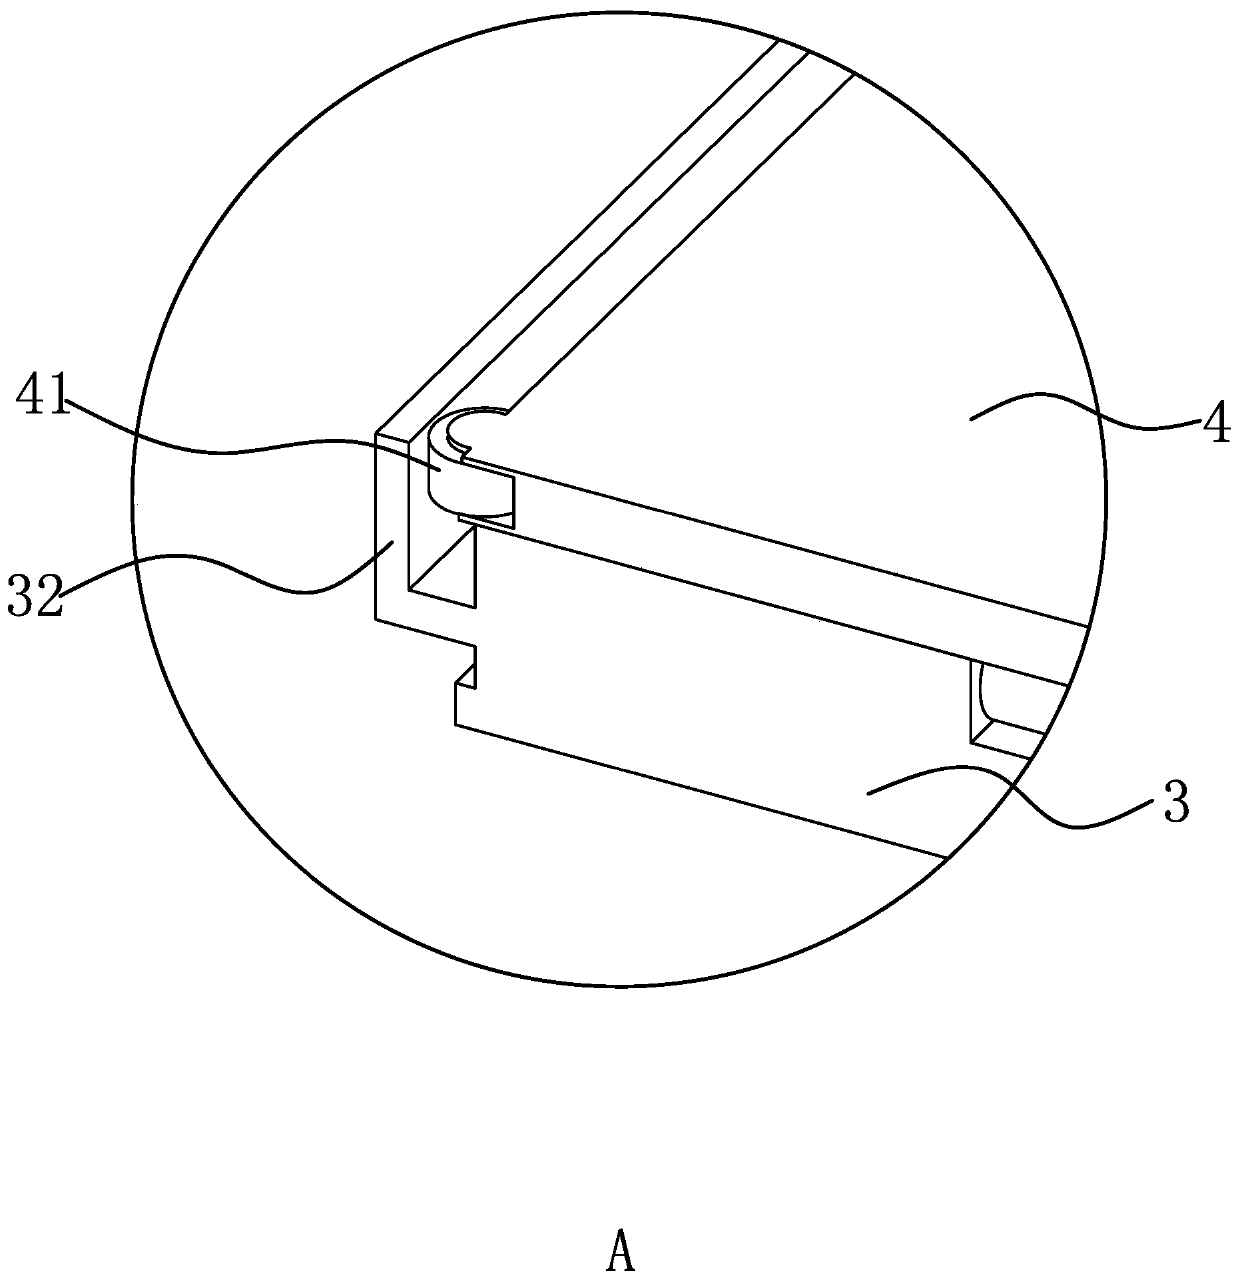 A loading and unloading device in a logistics system